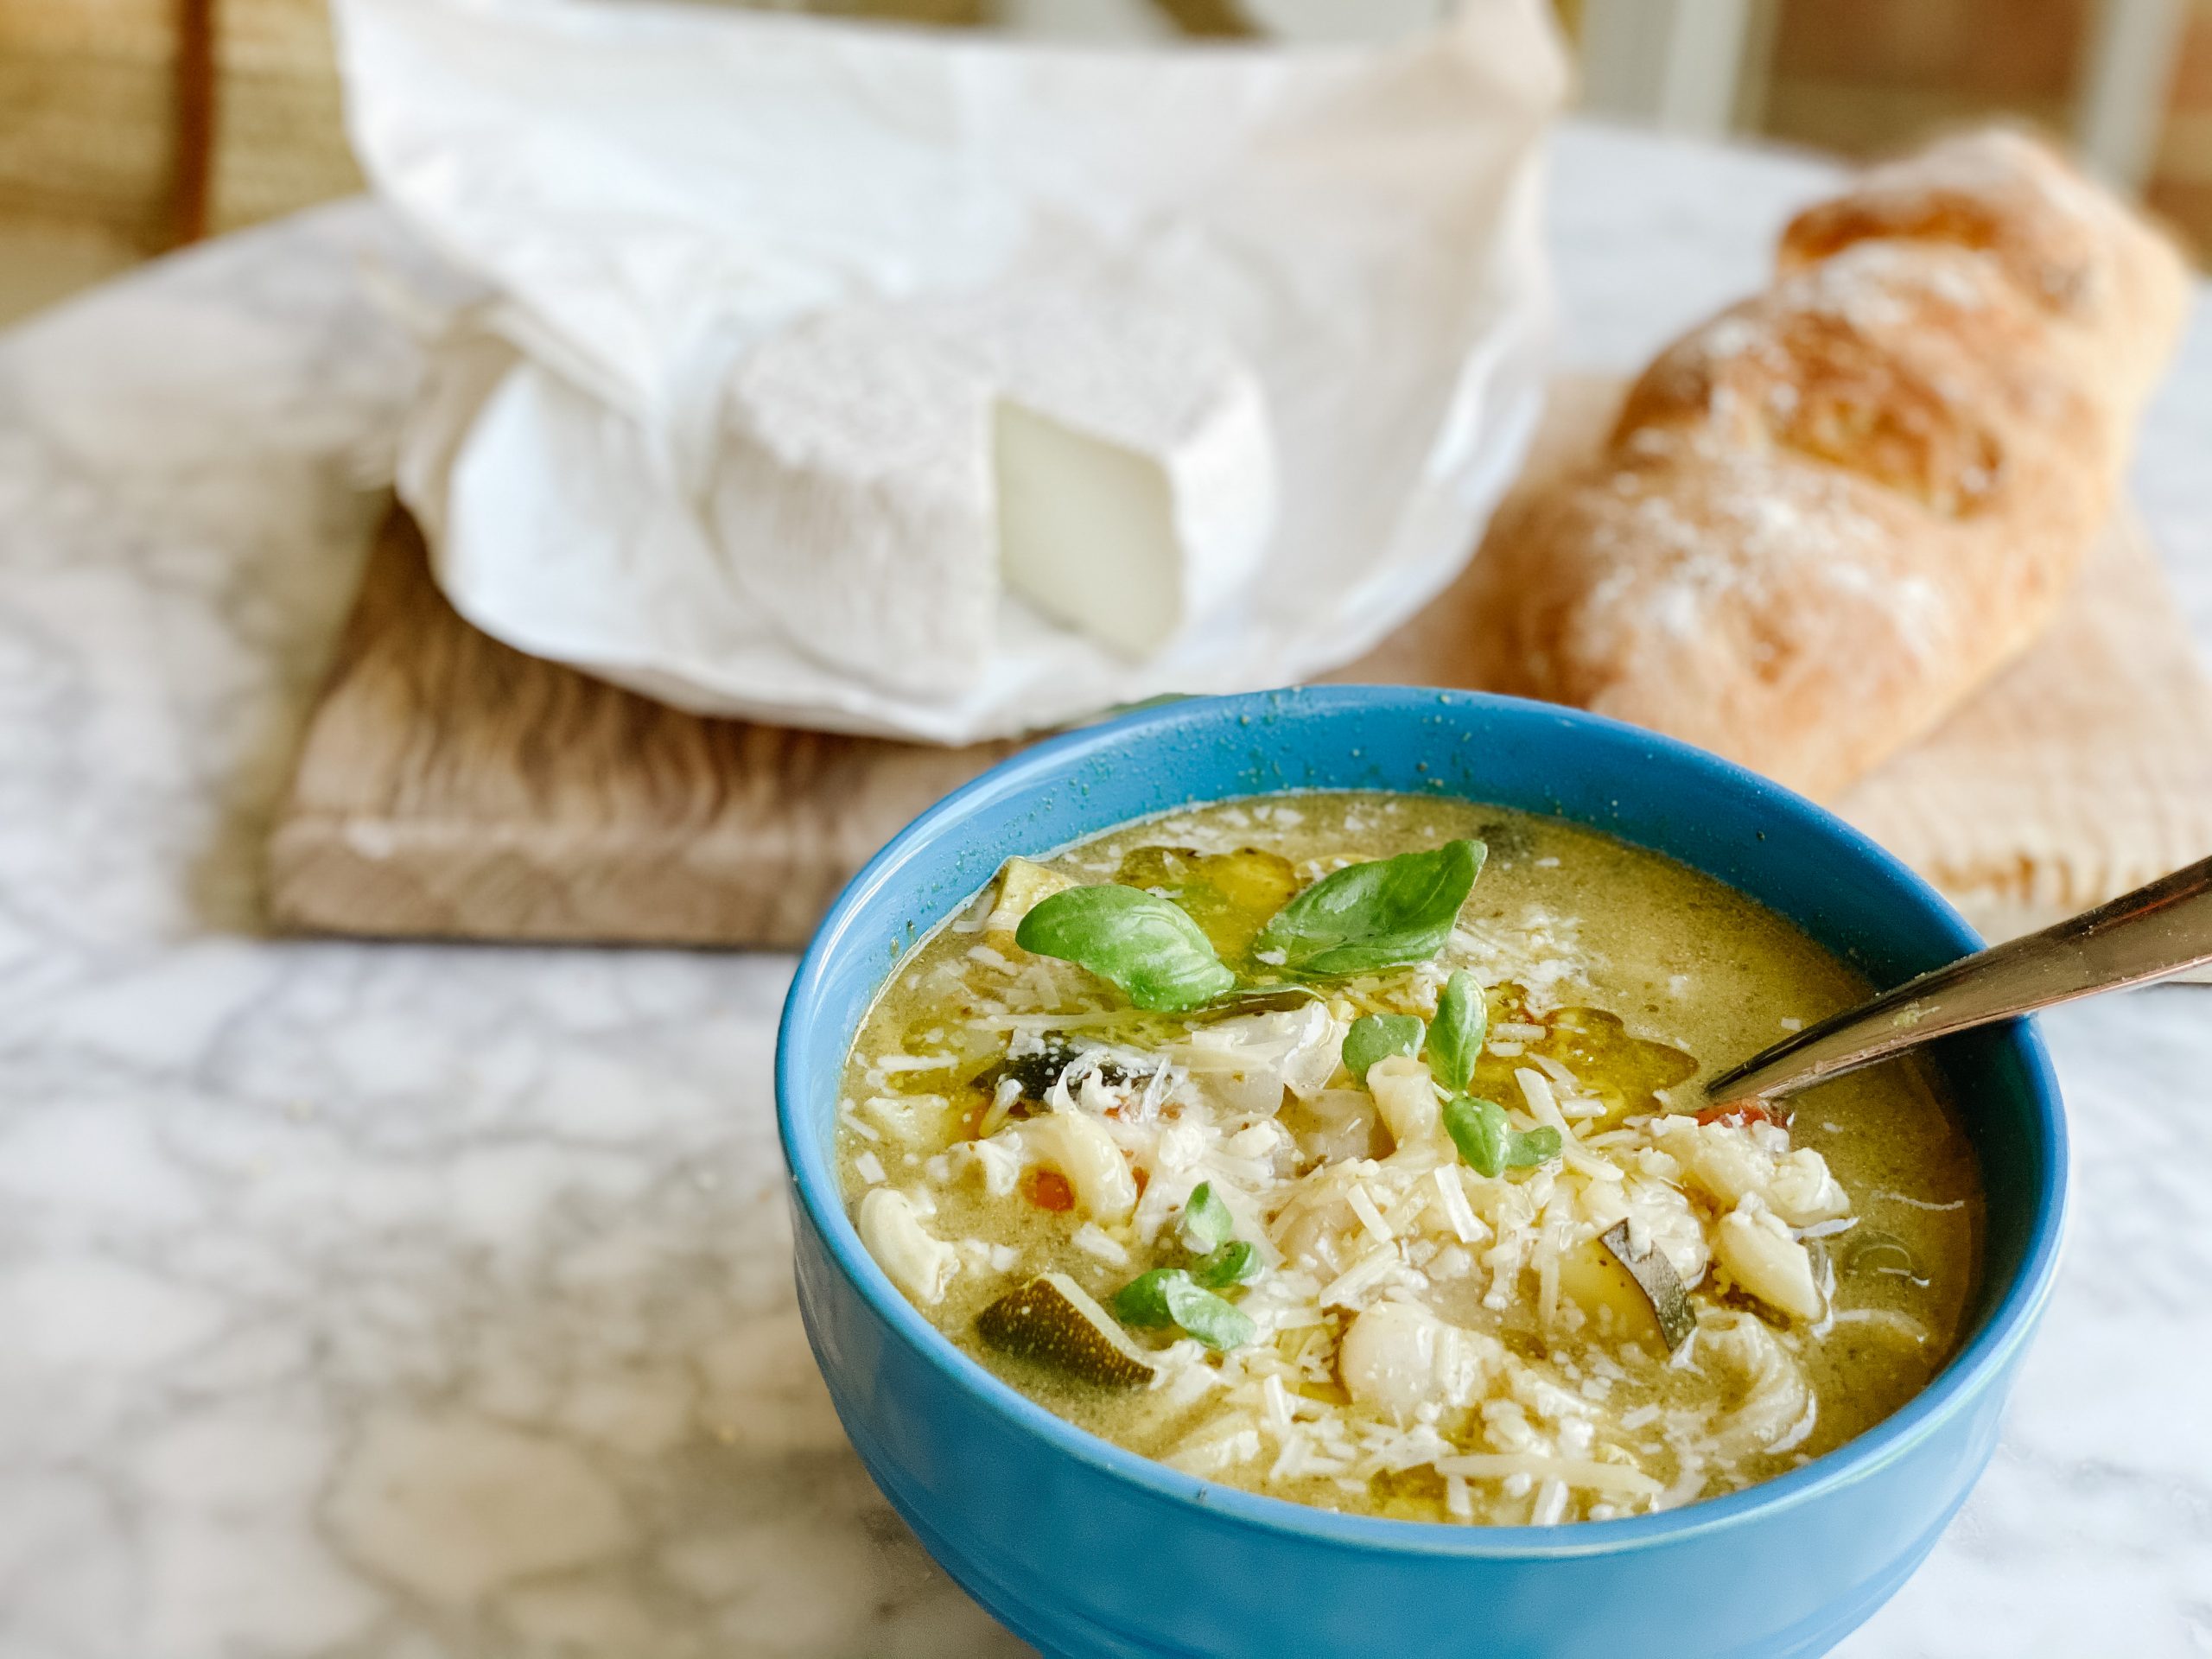 Soupe au Pistou in a blue bowl with baguette and goat cheese